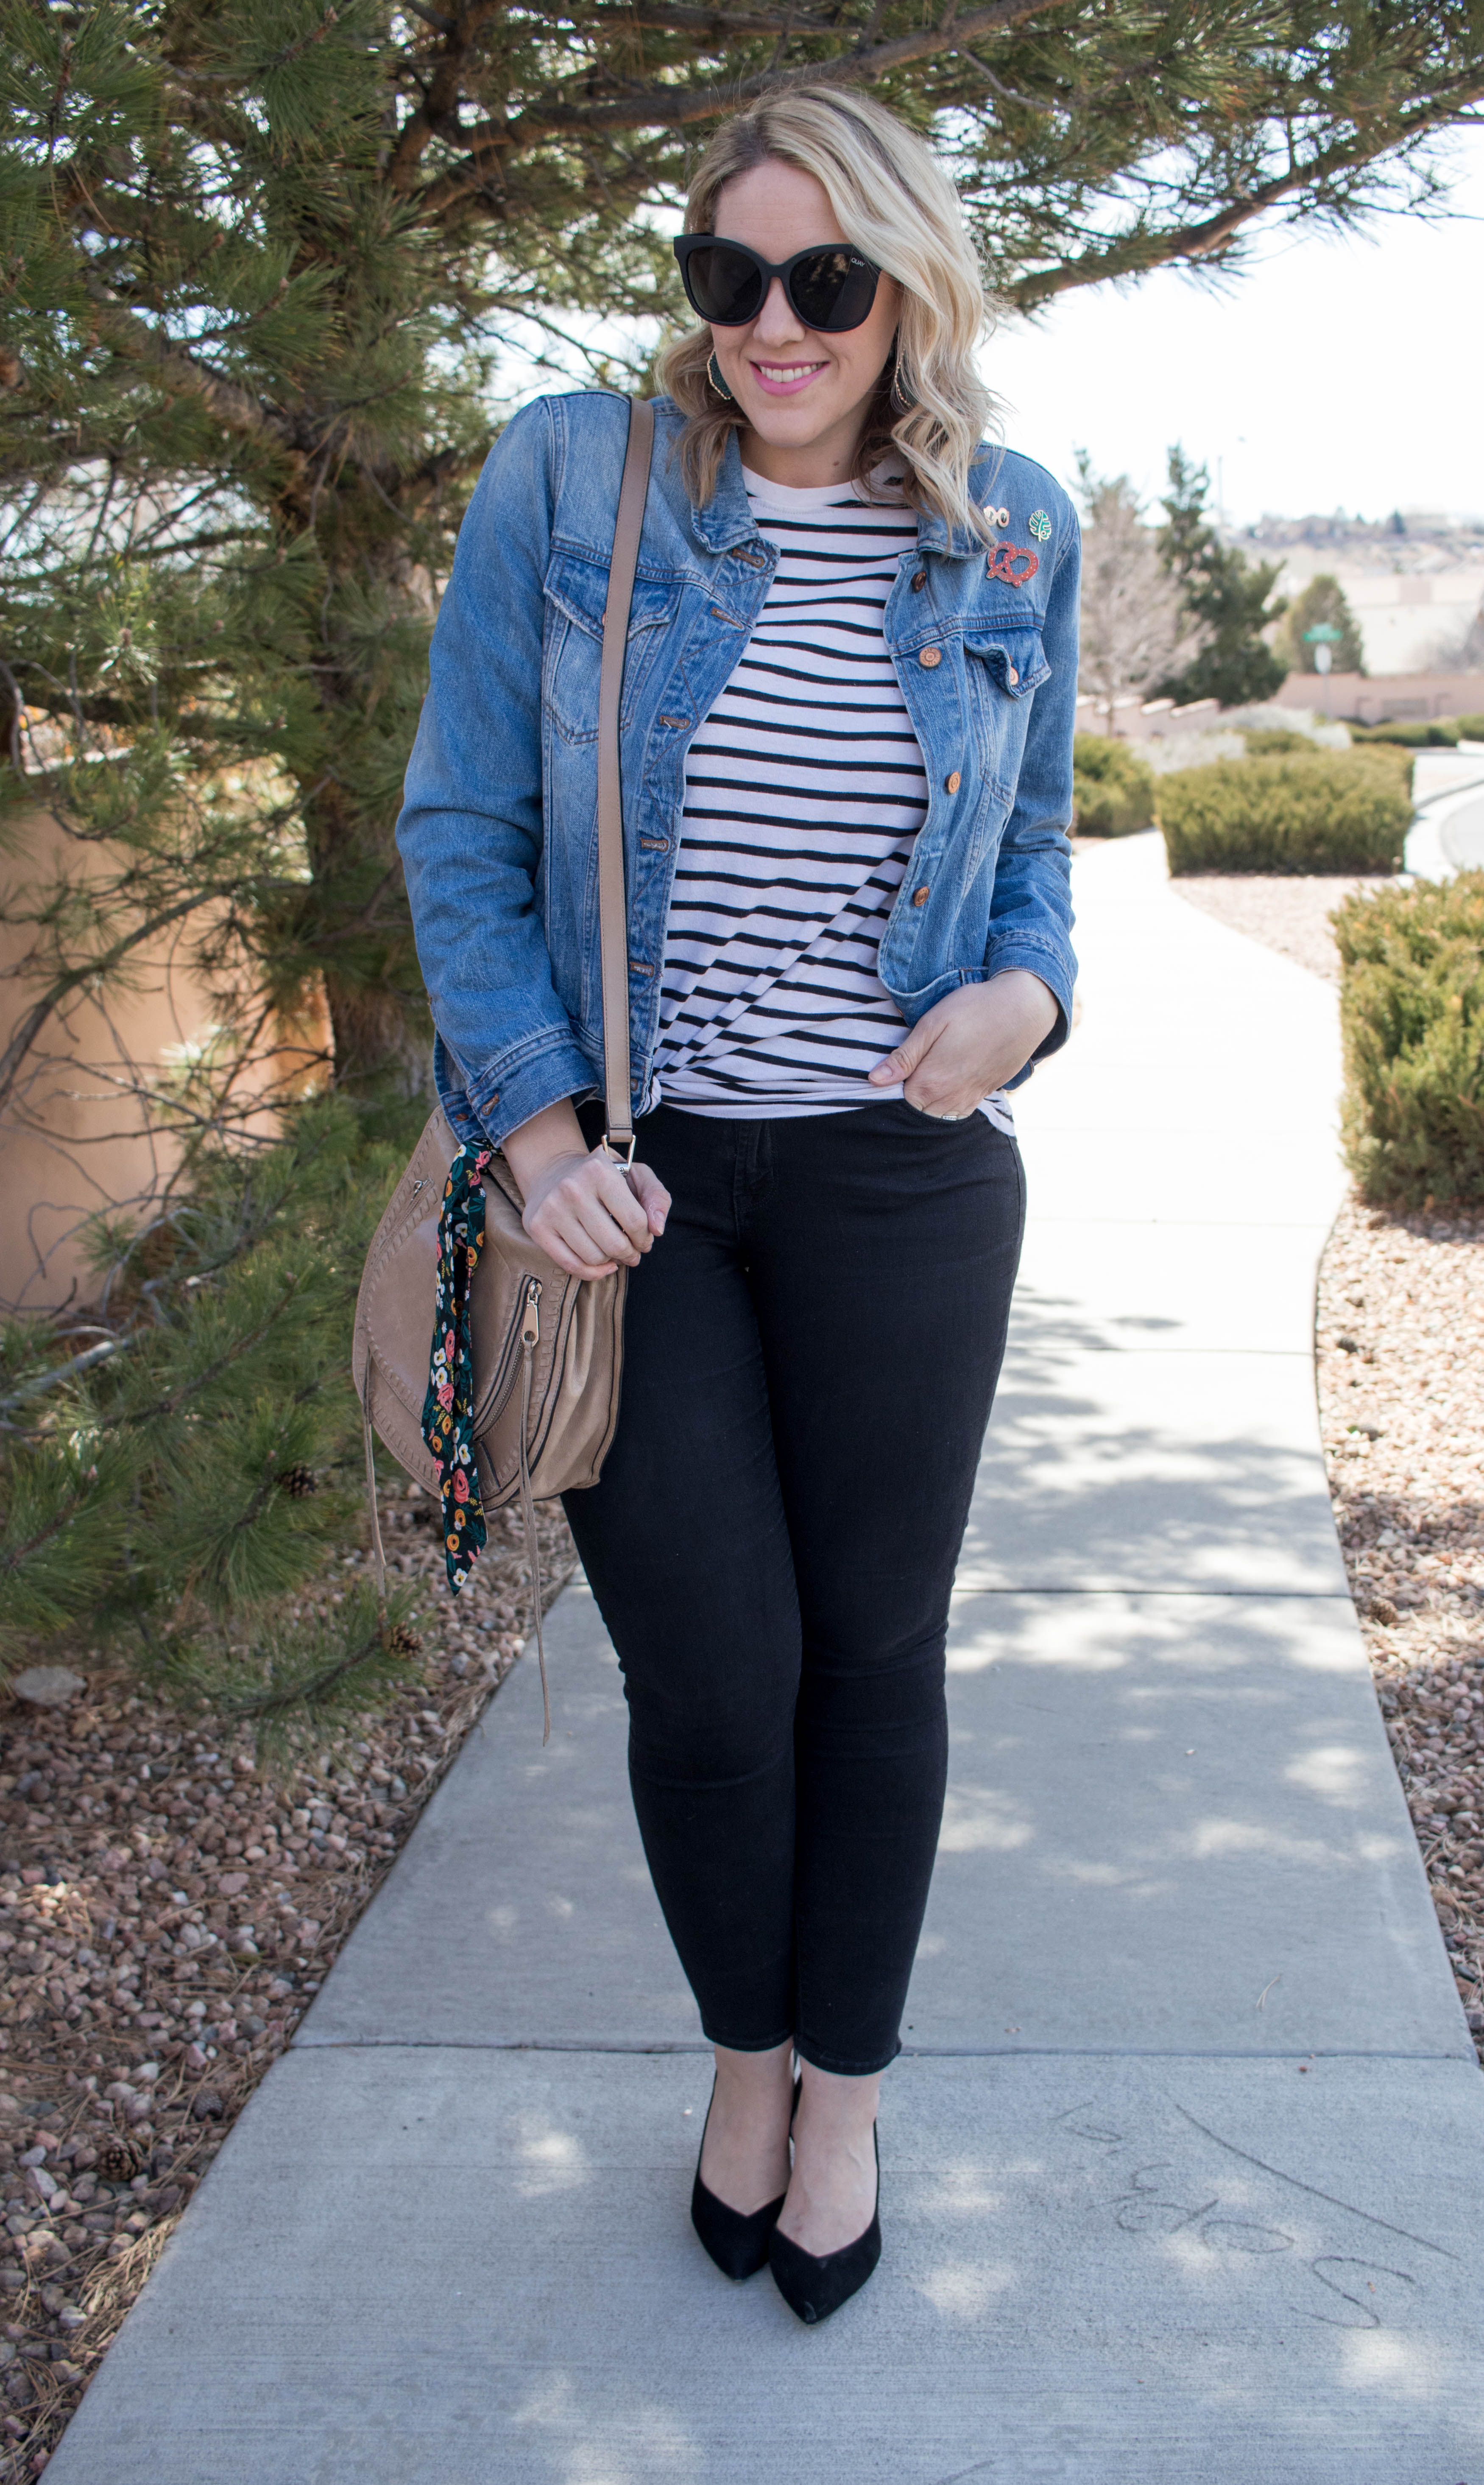 spring to winter transitional style #denimjacket #casualstyle #streetstyle